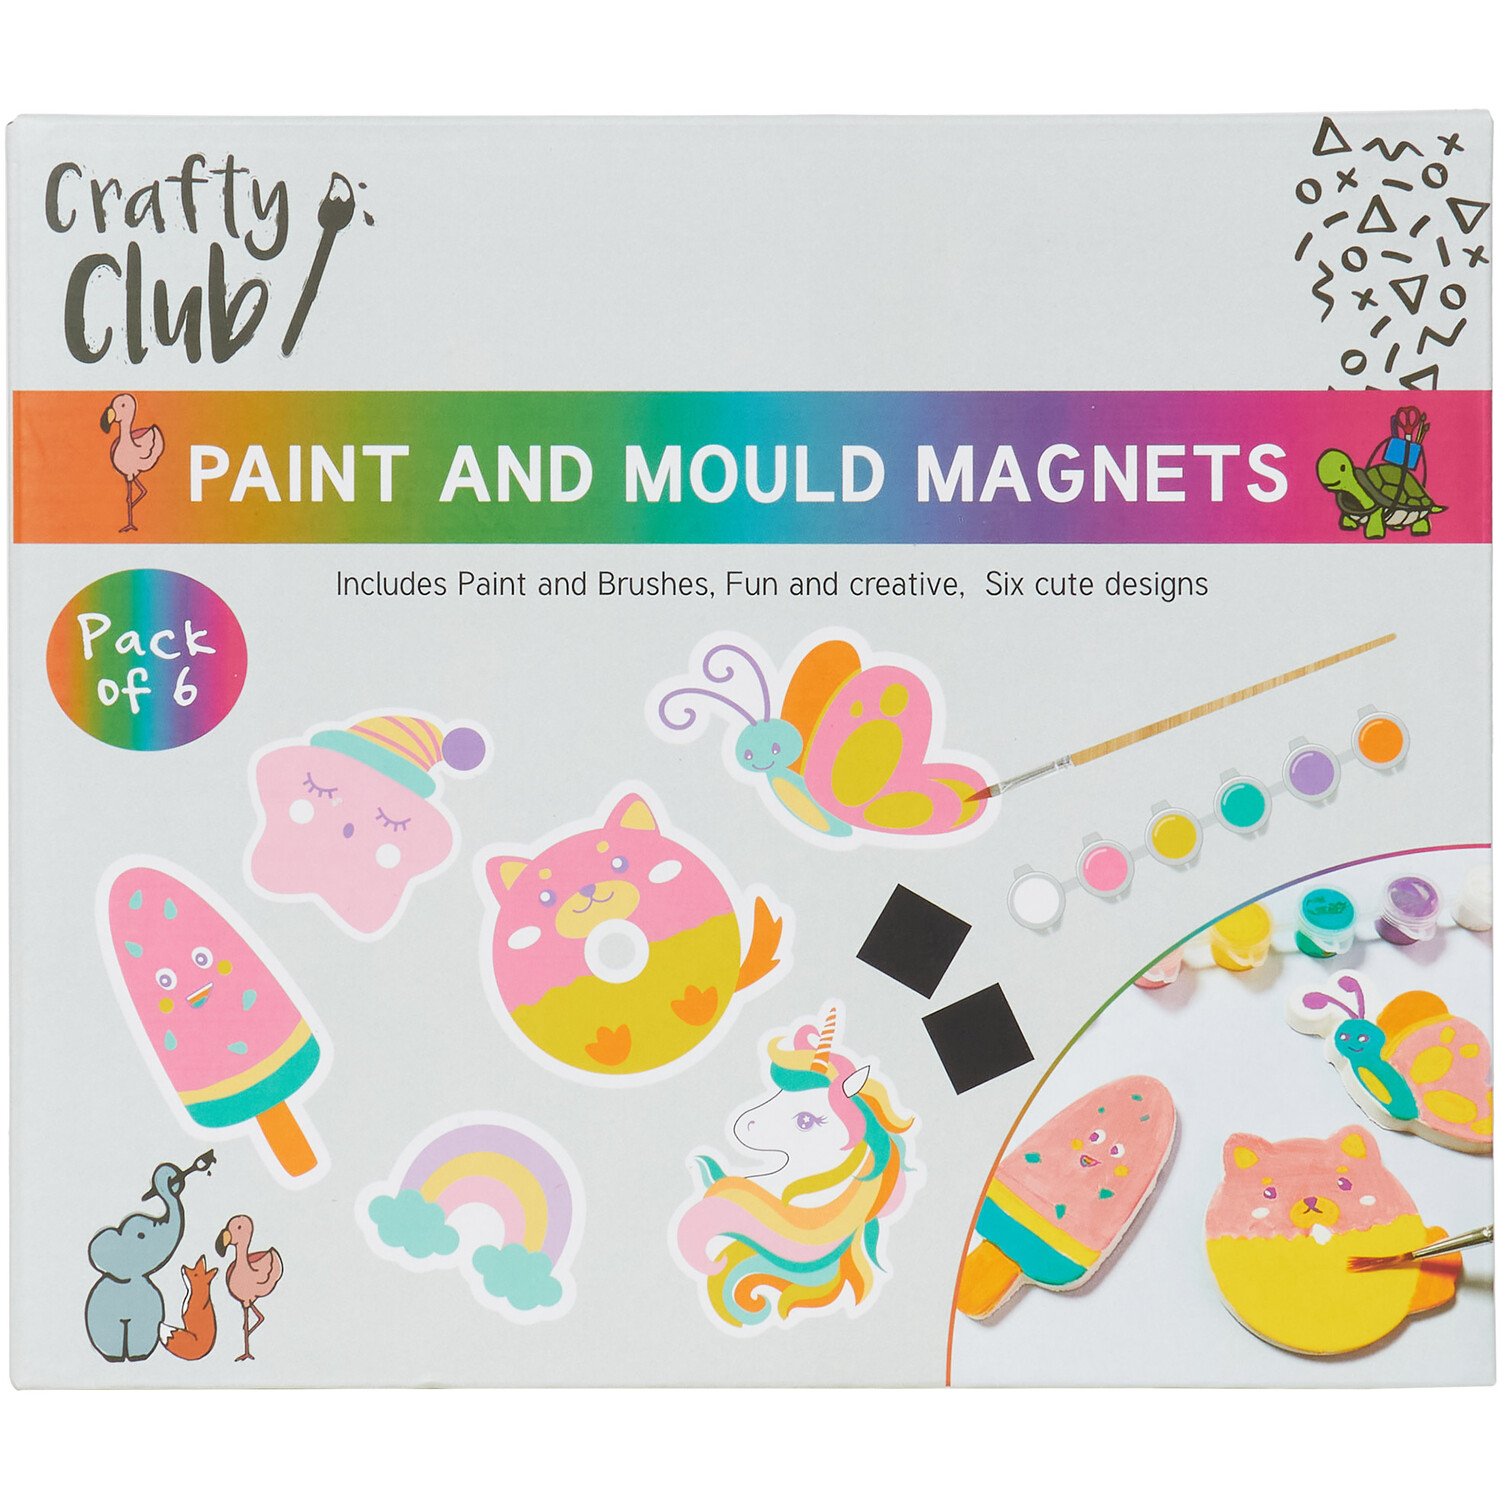 Paint and Mould Magnets Image 1